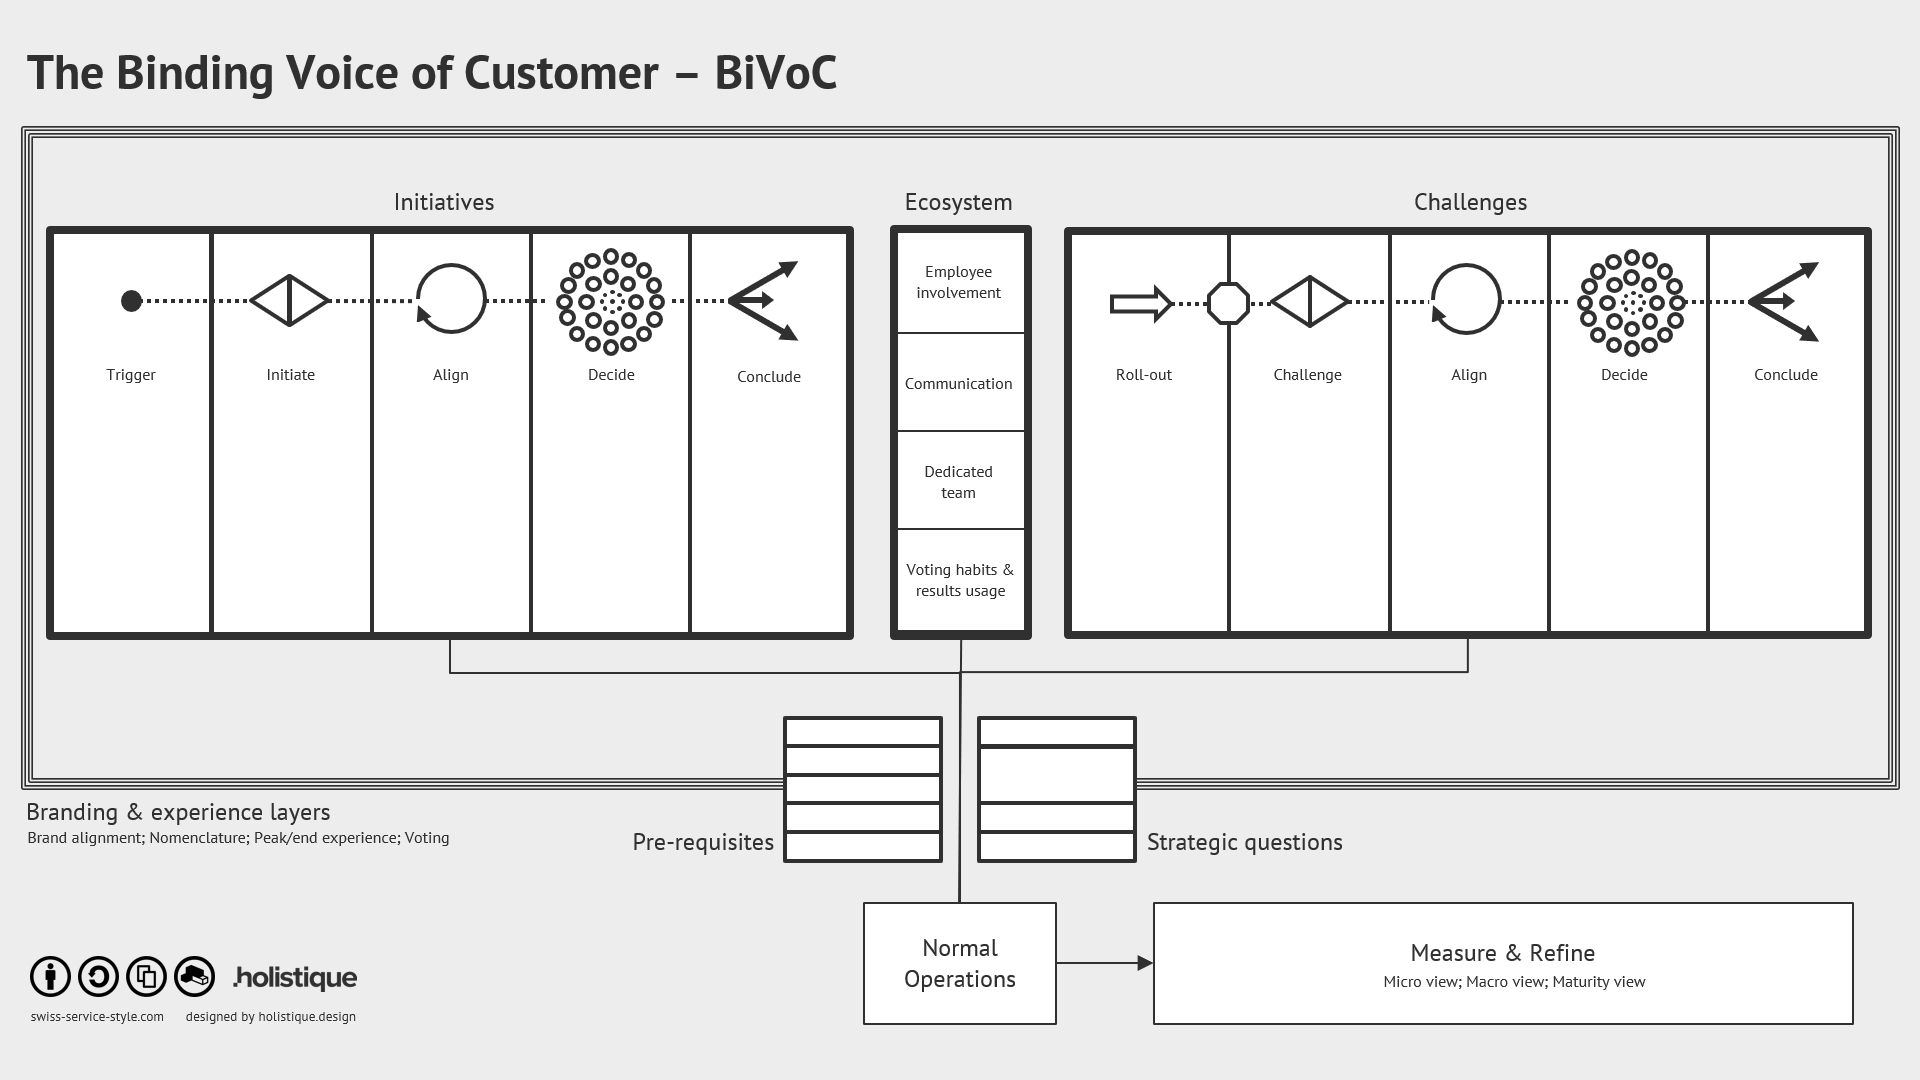 Binding Voice of Customer (BiVoC) canvas for a Swiss Service Style